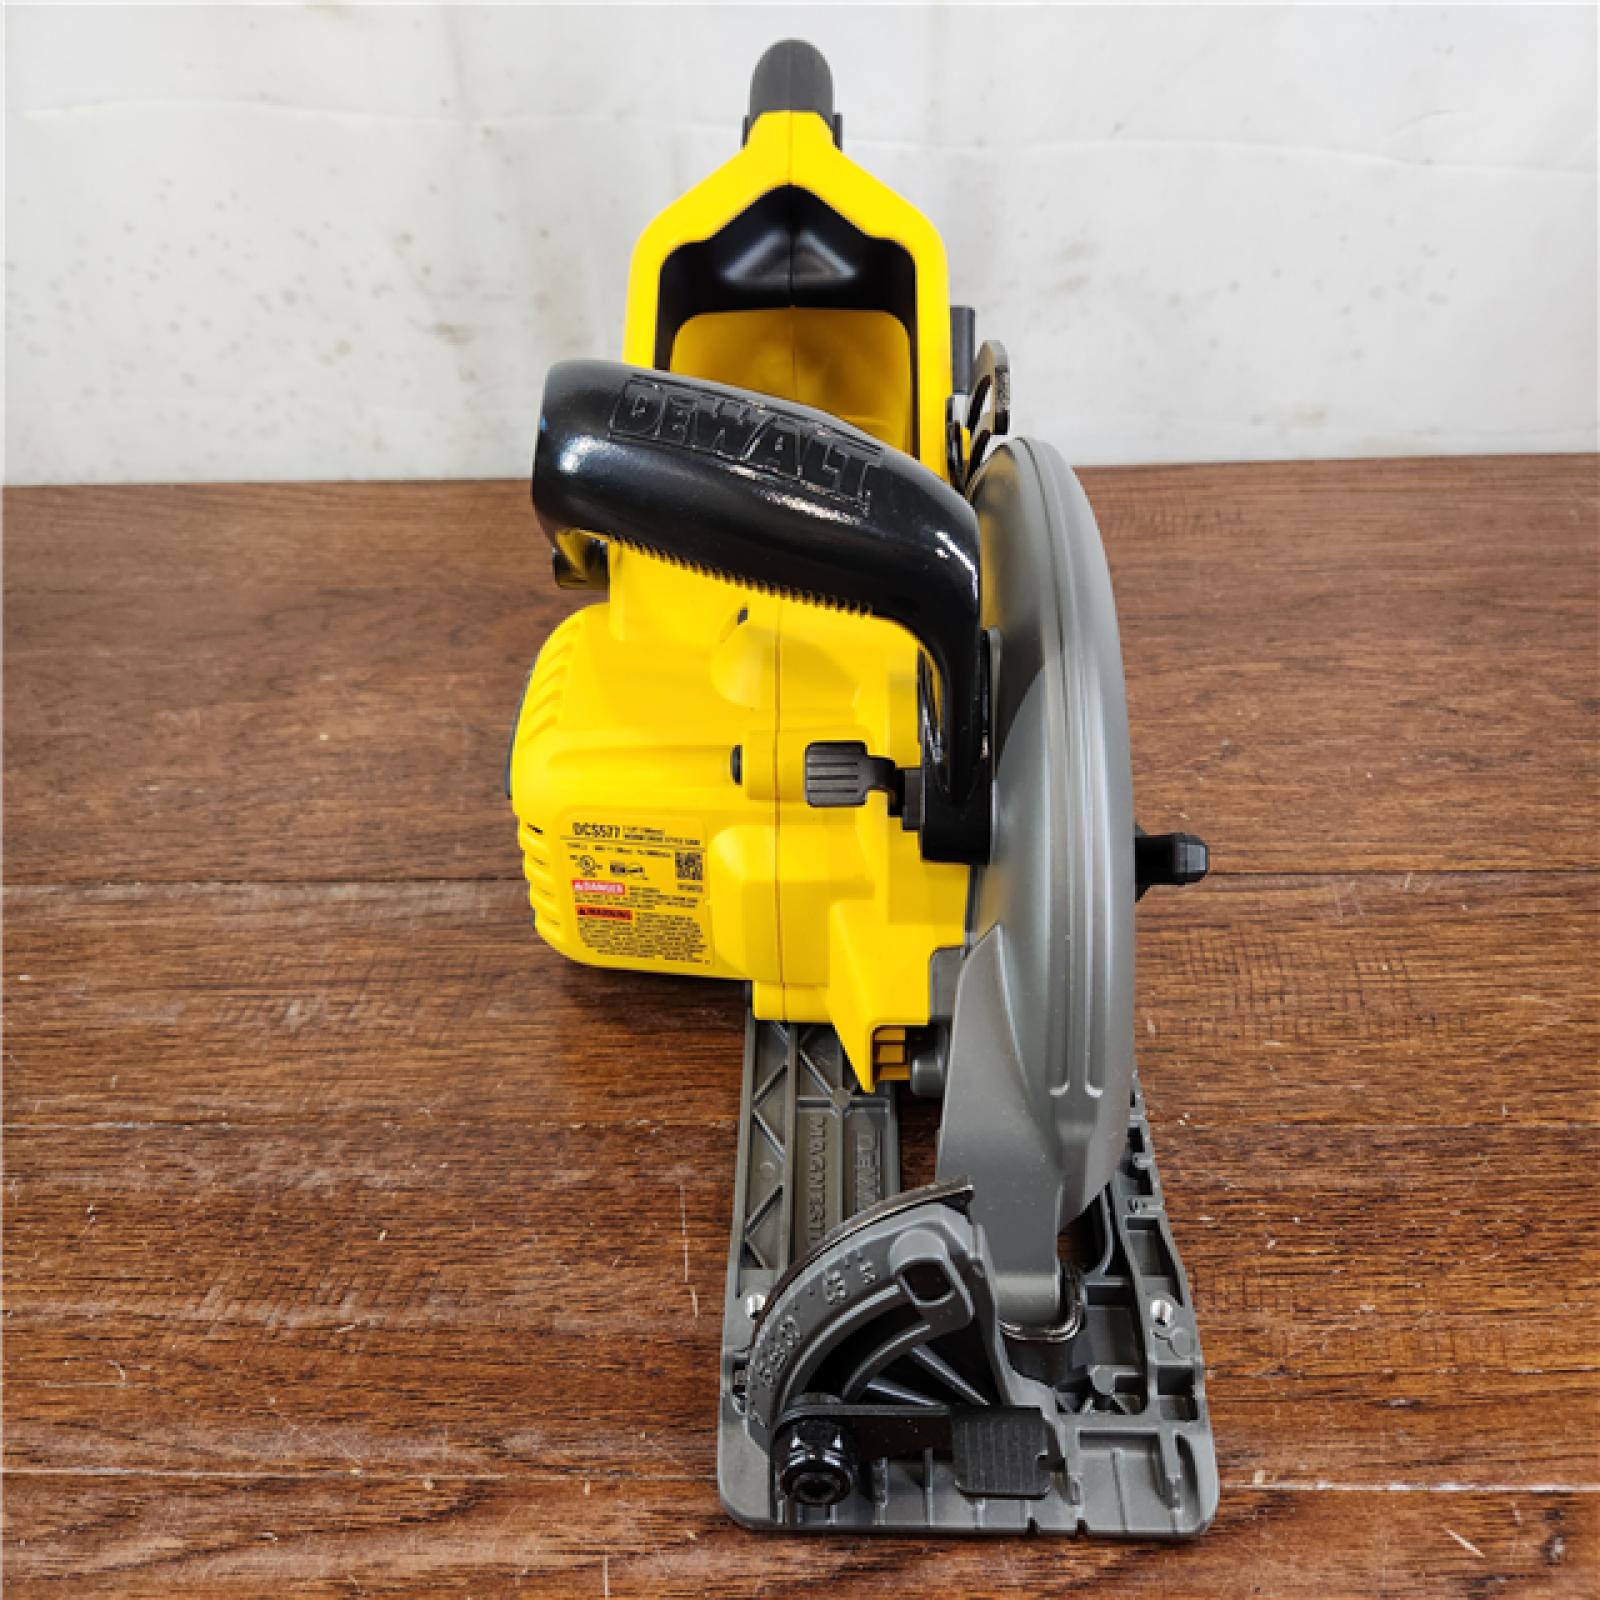 AS-IS DeWalt FLEXVOLT 60V MAX Cordless Brushless 7-1/4 in. Wormdrive Style Circular Saw (Tool-Only)